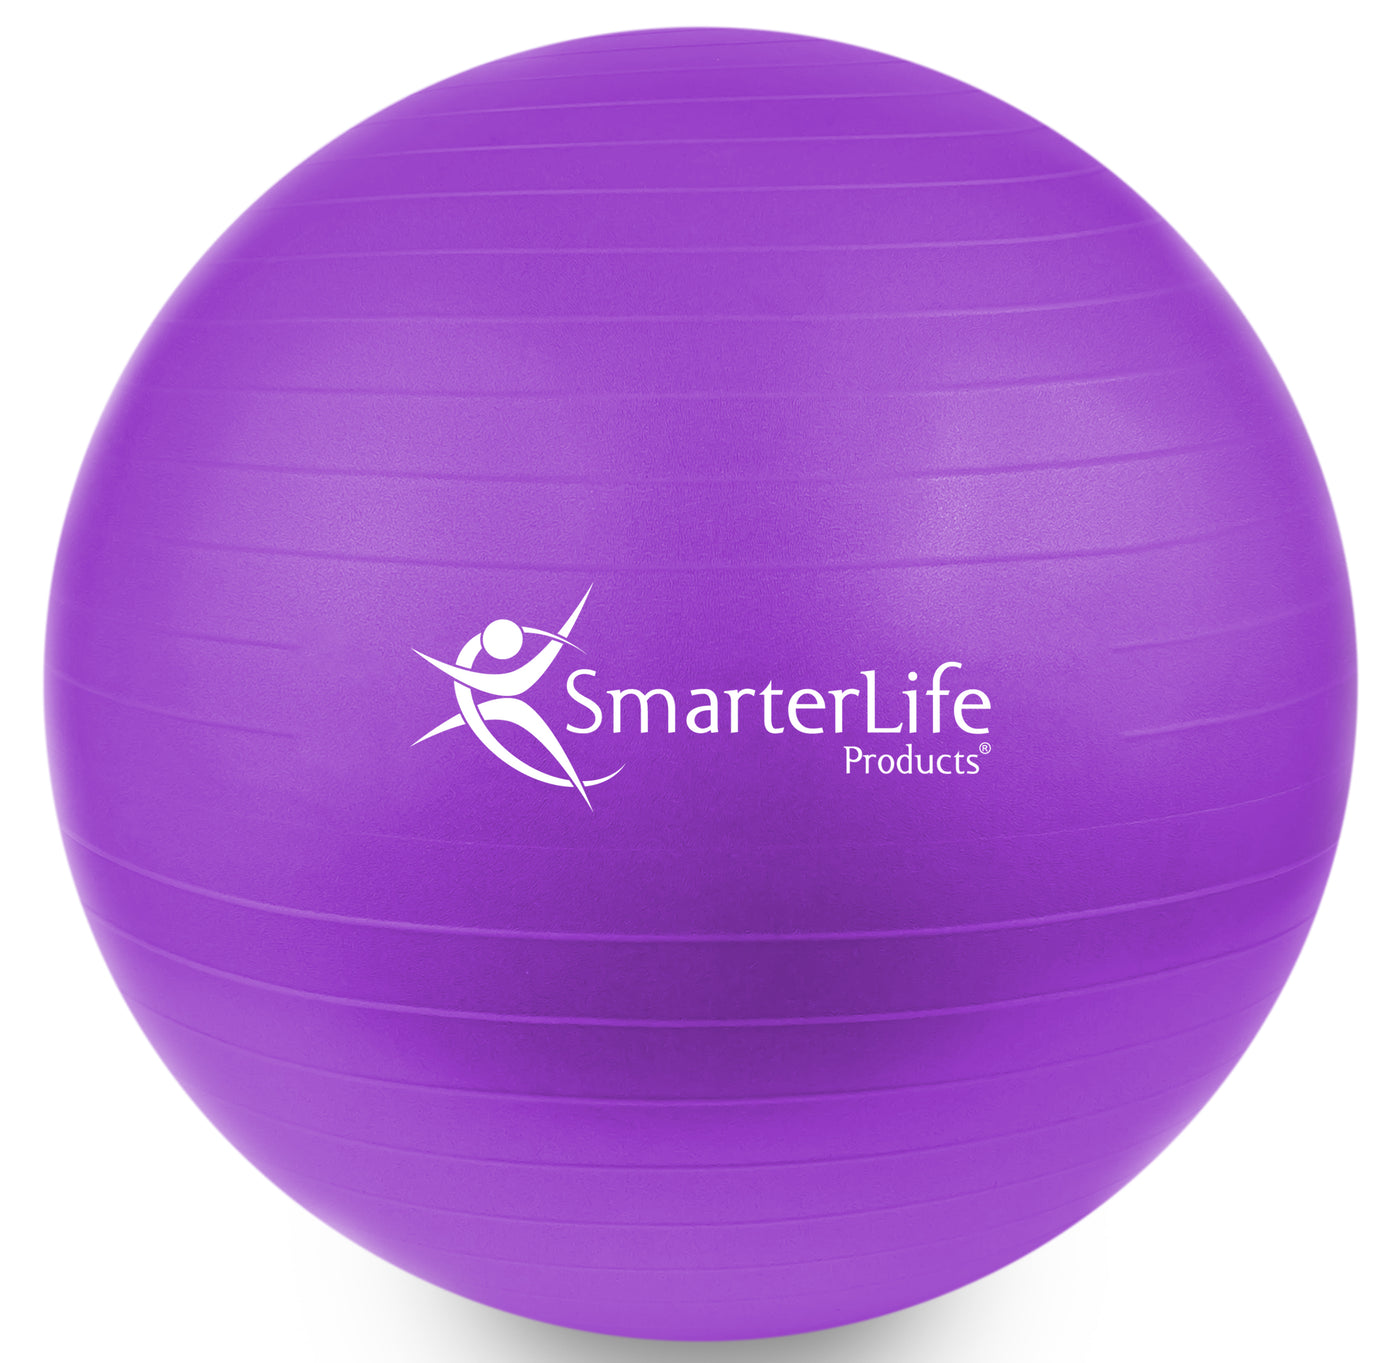 VIDEO) Tighten and Tone Stability Ball Workout - The Balanced Berry